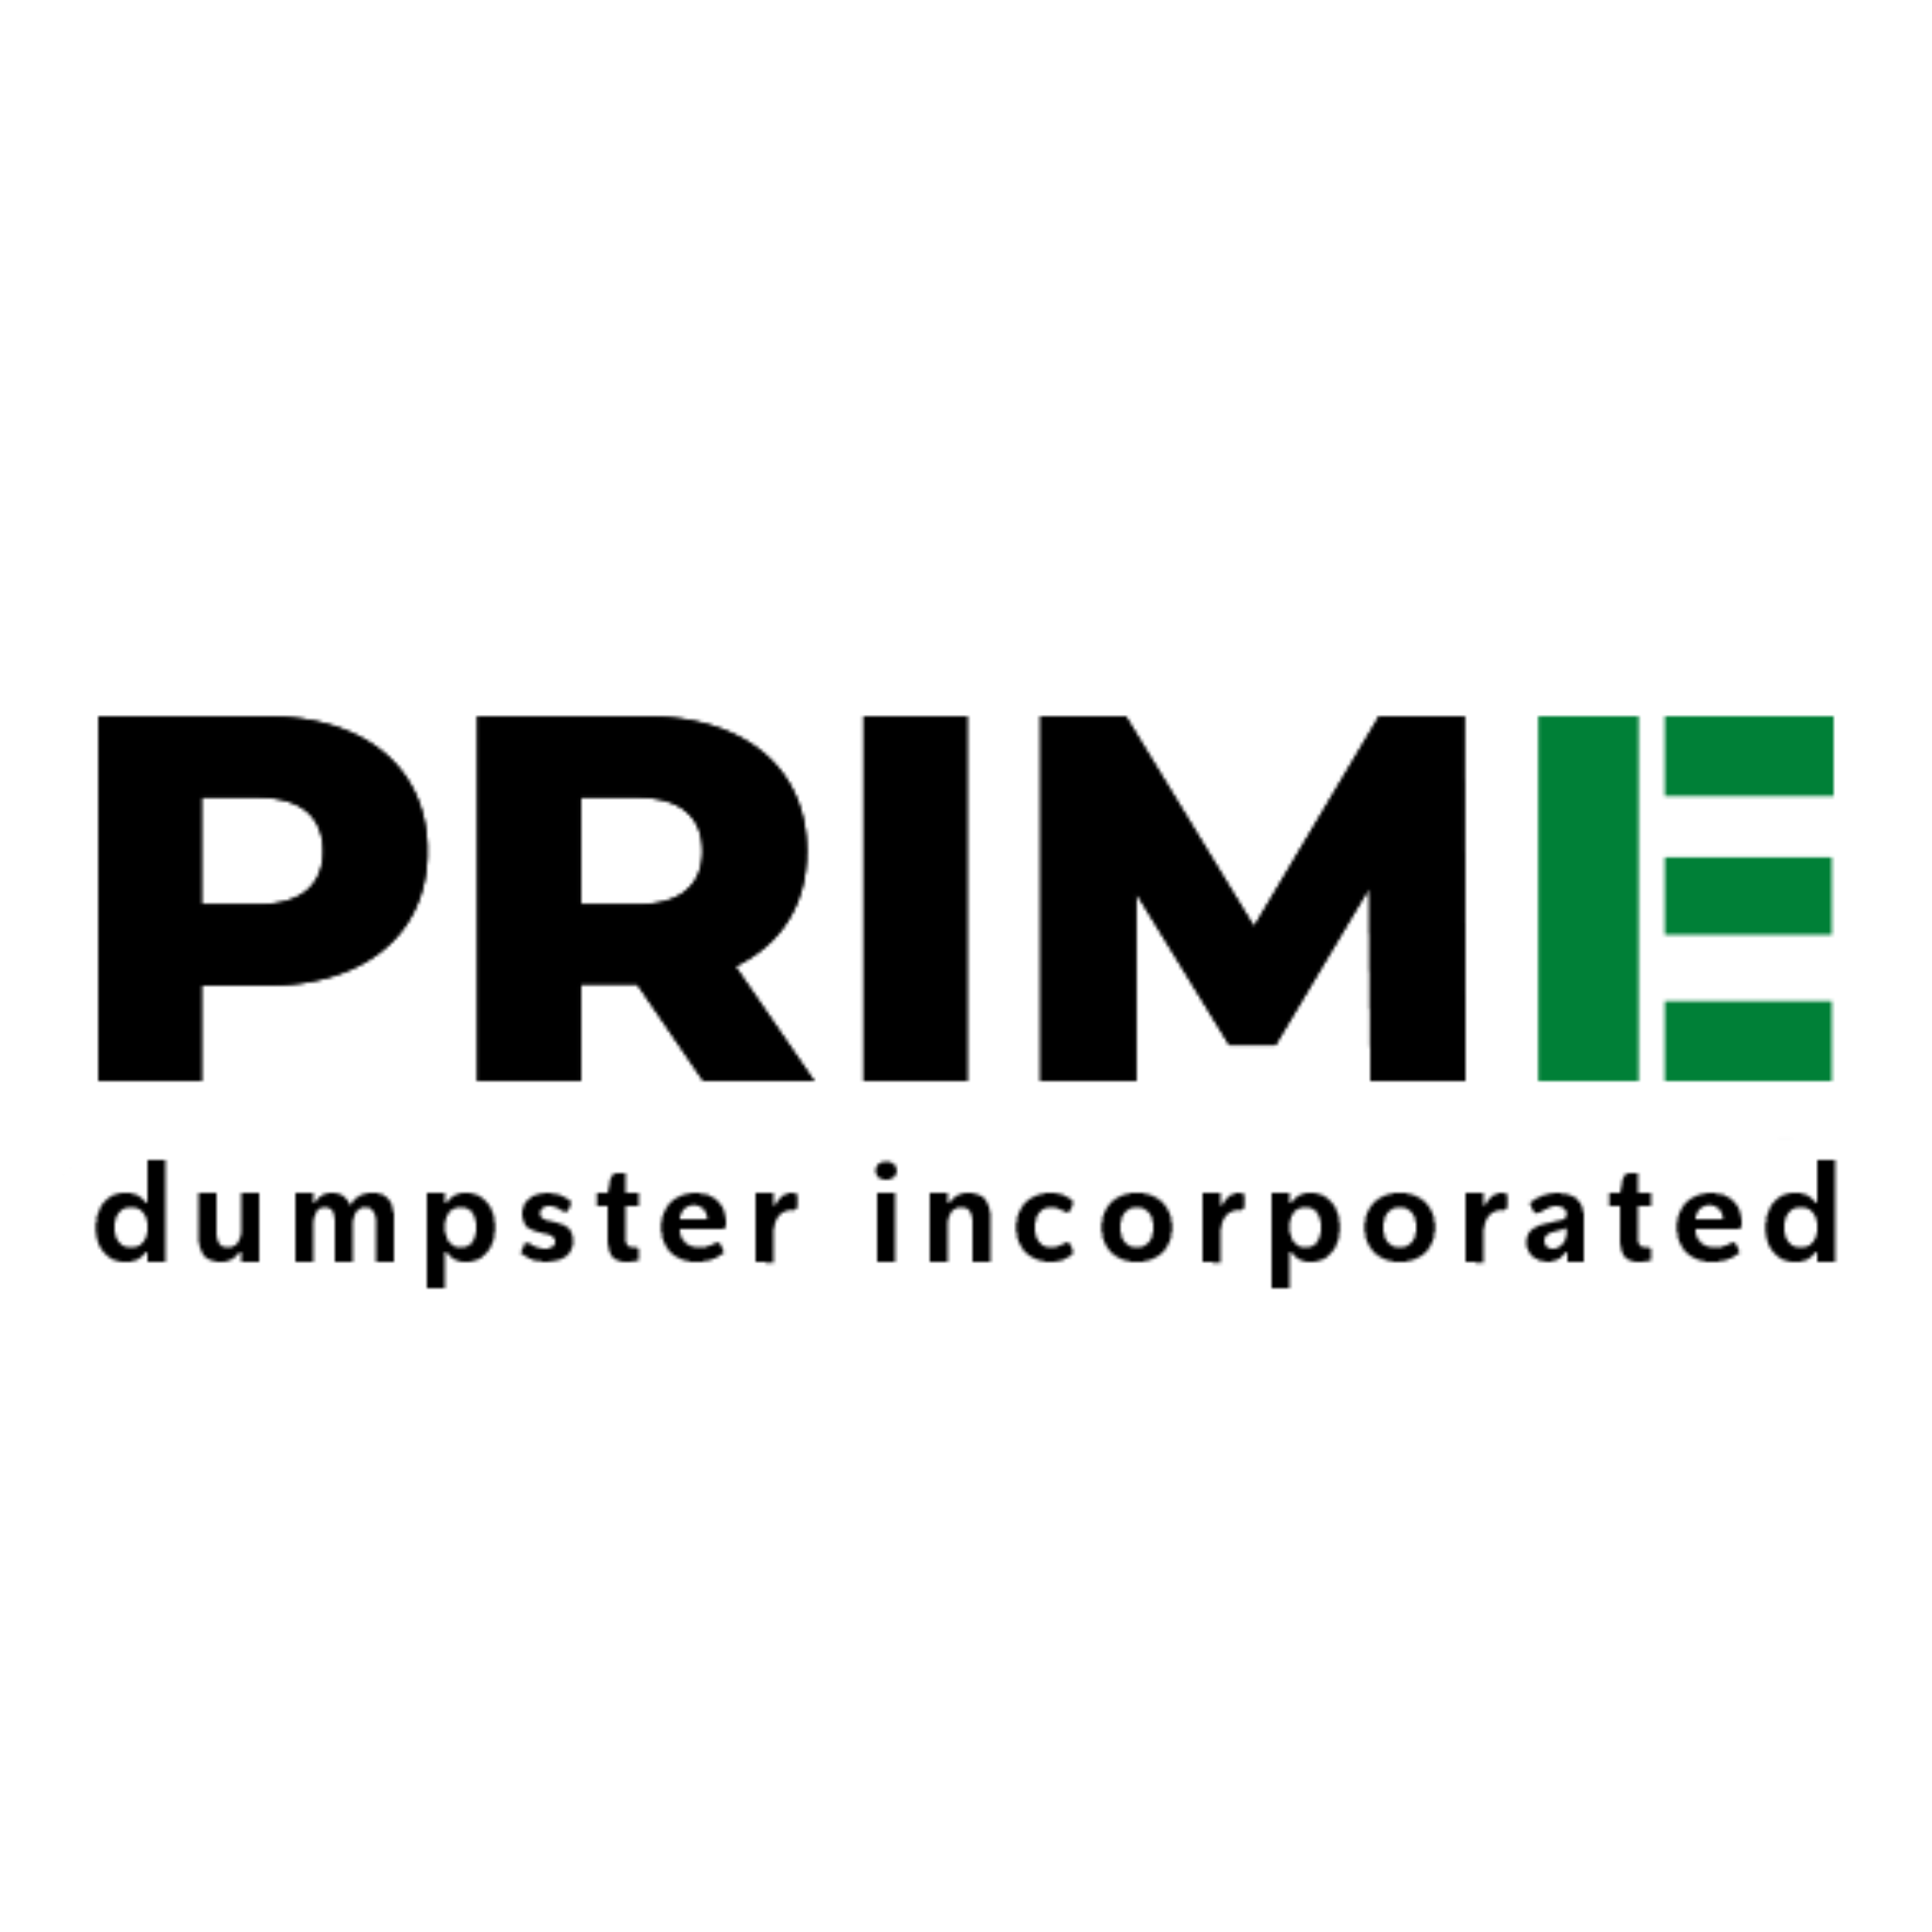 Prime Dumpster is Changing the Landscape of Large-Scale Waste Management